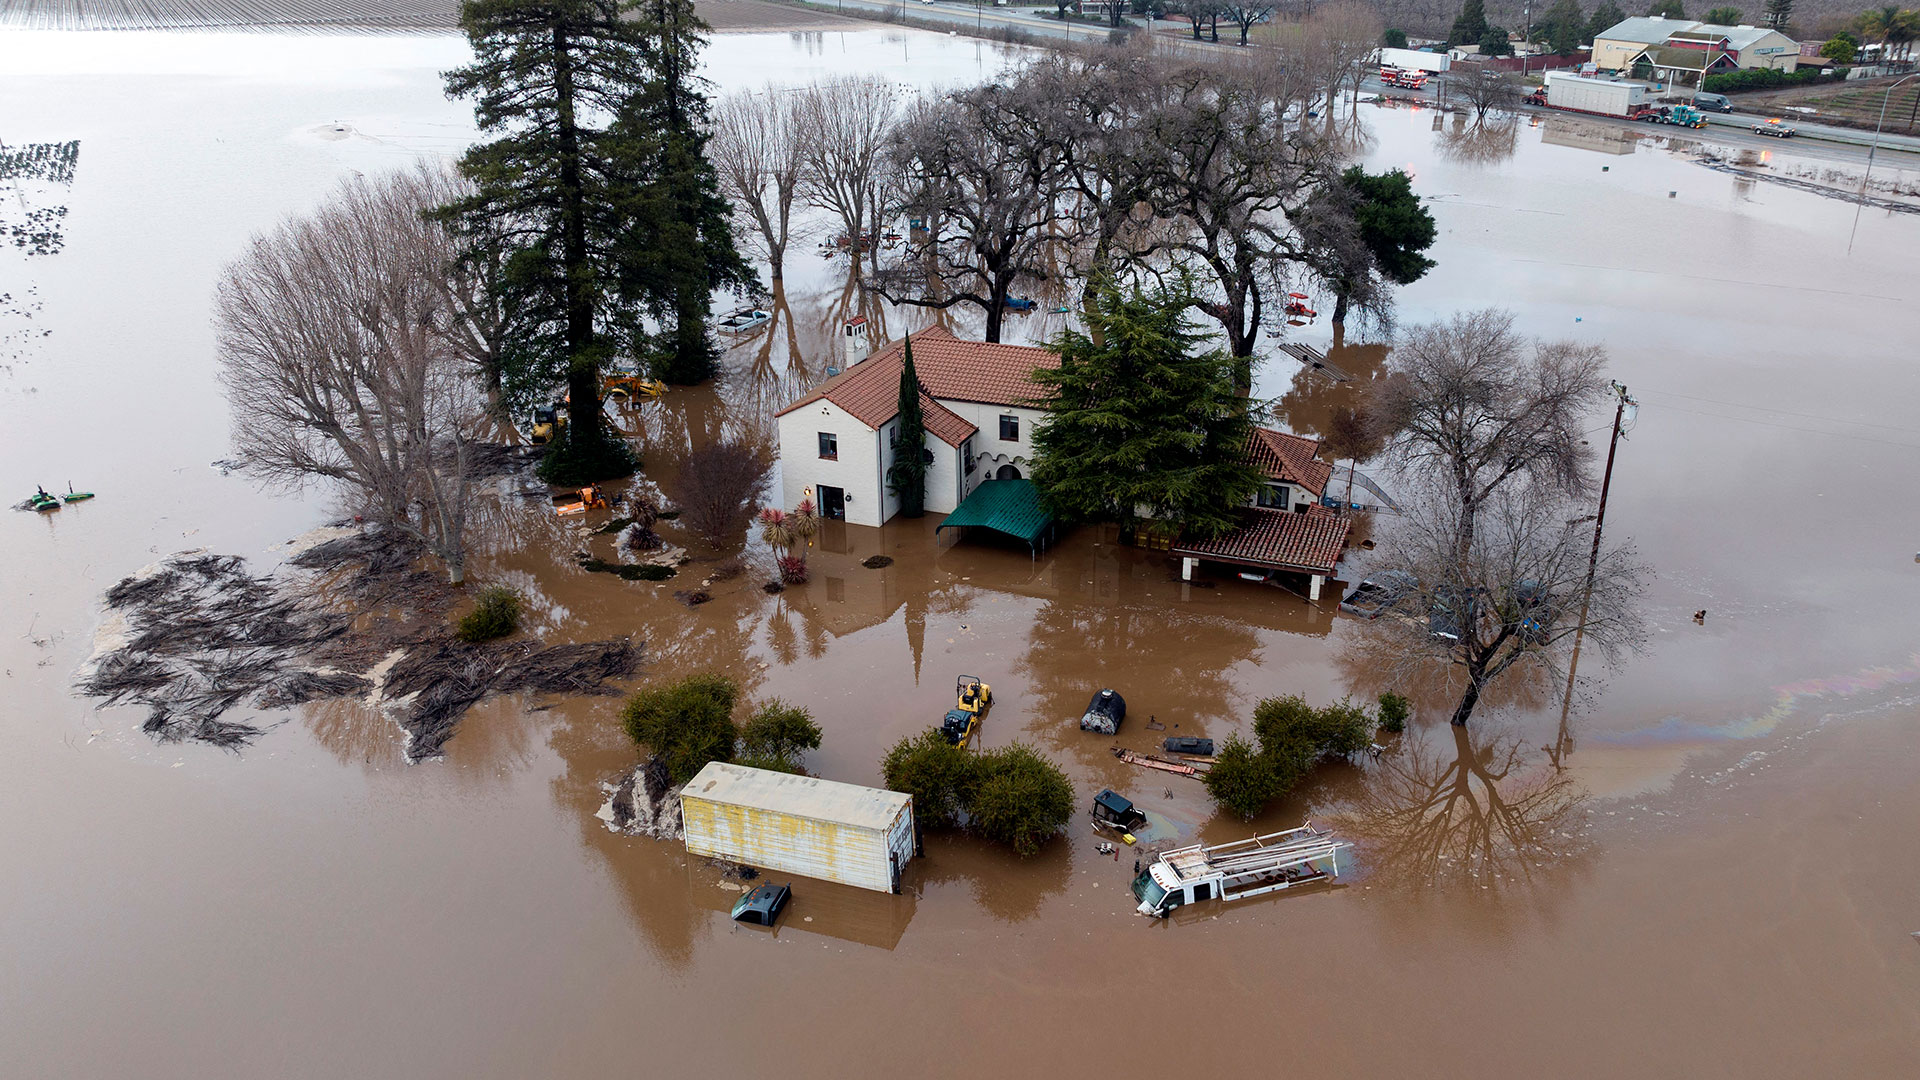 This aerial view shows a flooded house partially underwater in Gilroy, California, on January 9, 2023 (AFP)